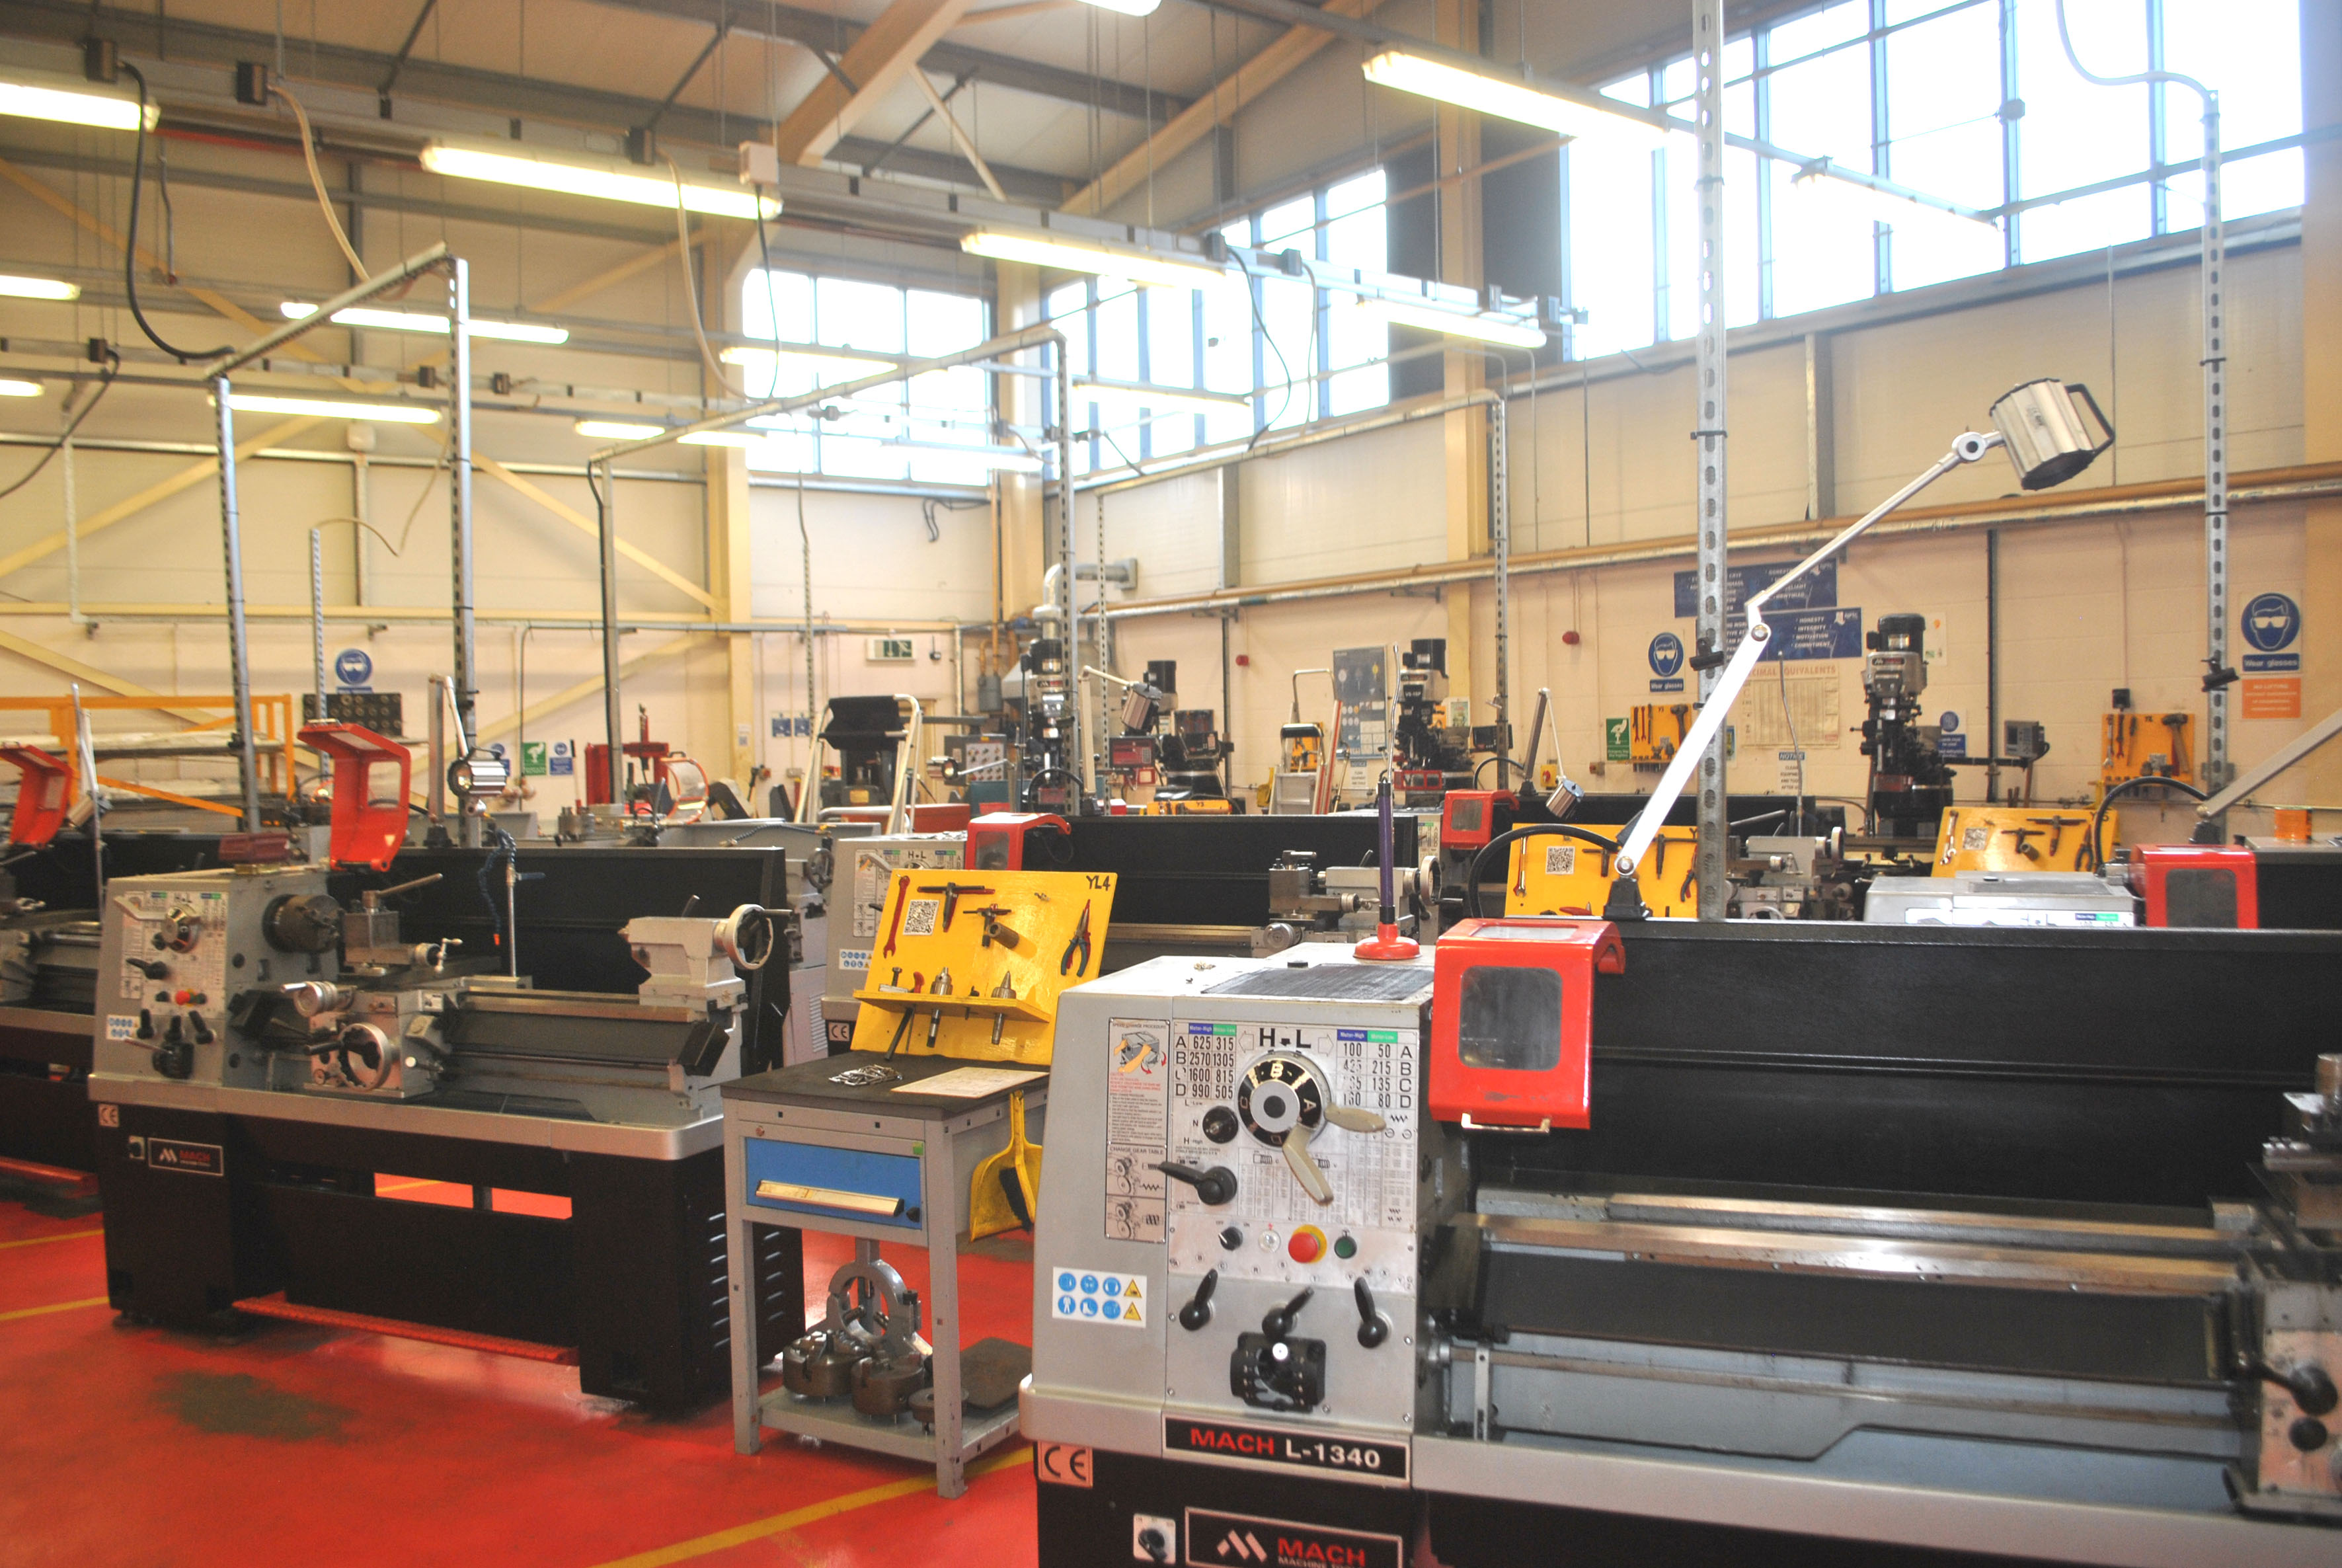 A SIGNIFICANT BOOST FOR ENGINEERING AND SKILLS TRAINING IN WALES